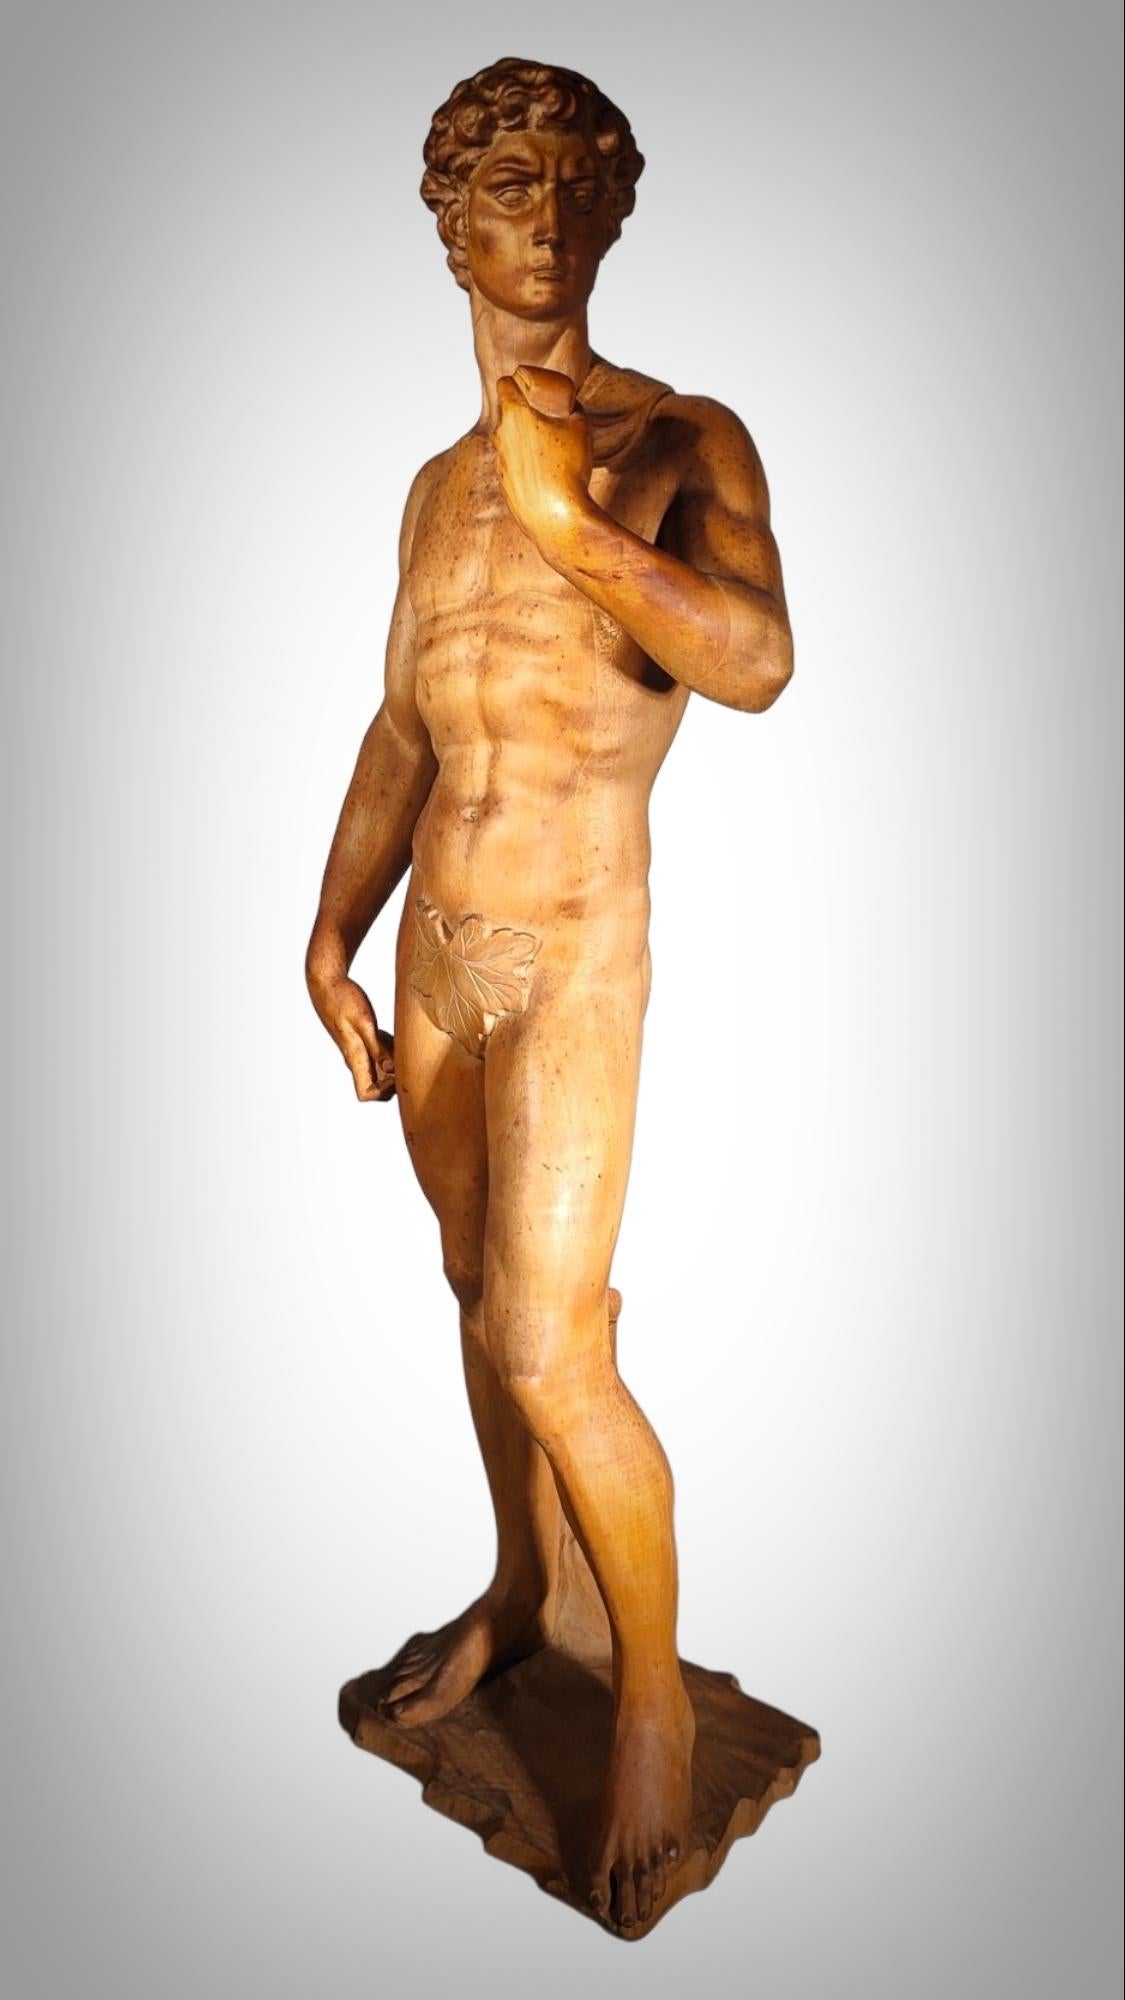 DAVID SCULPTURE IN WOOd For Sale 1